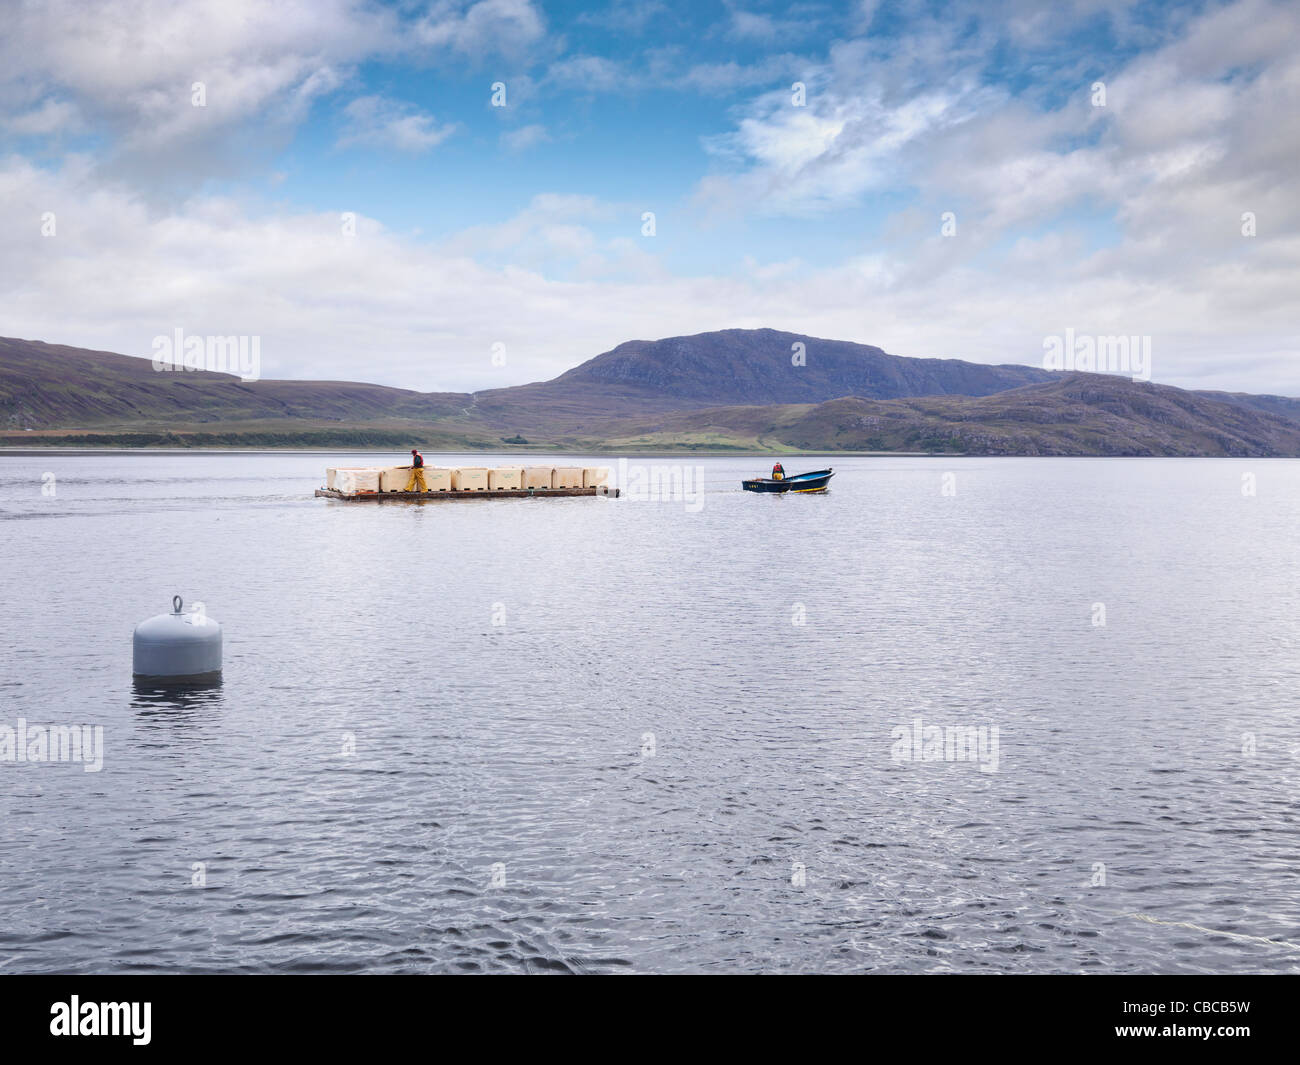 Barge carrying harvested fish Stock Photo